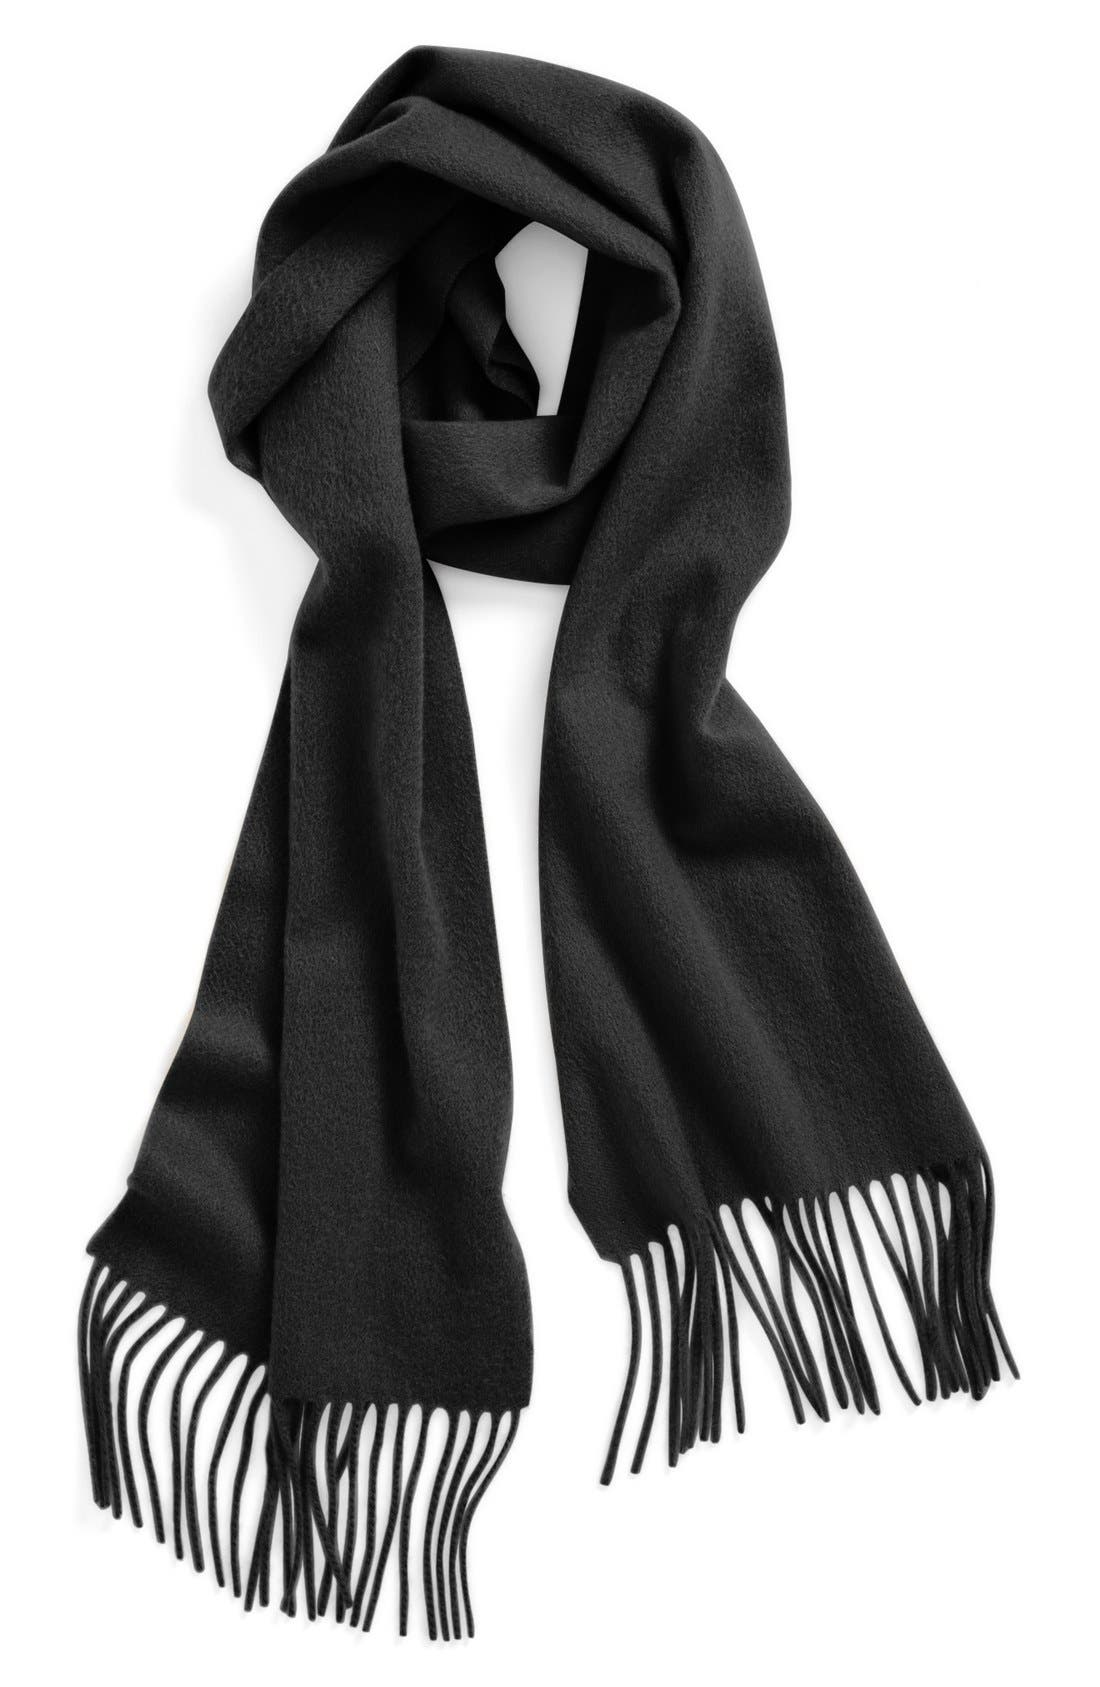 Nordstrom Solid Woven Cashmere Scarf 